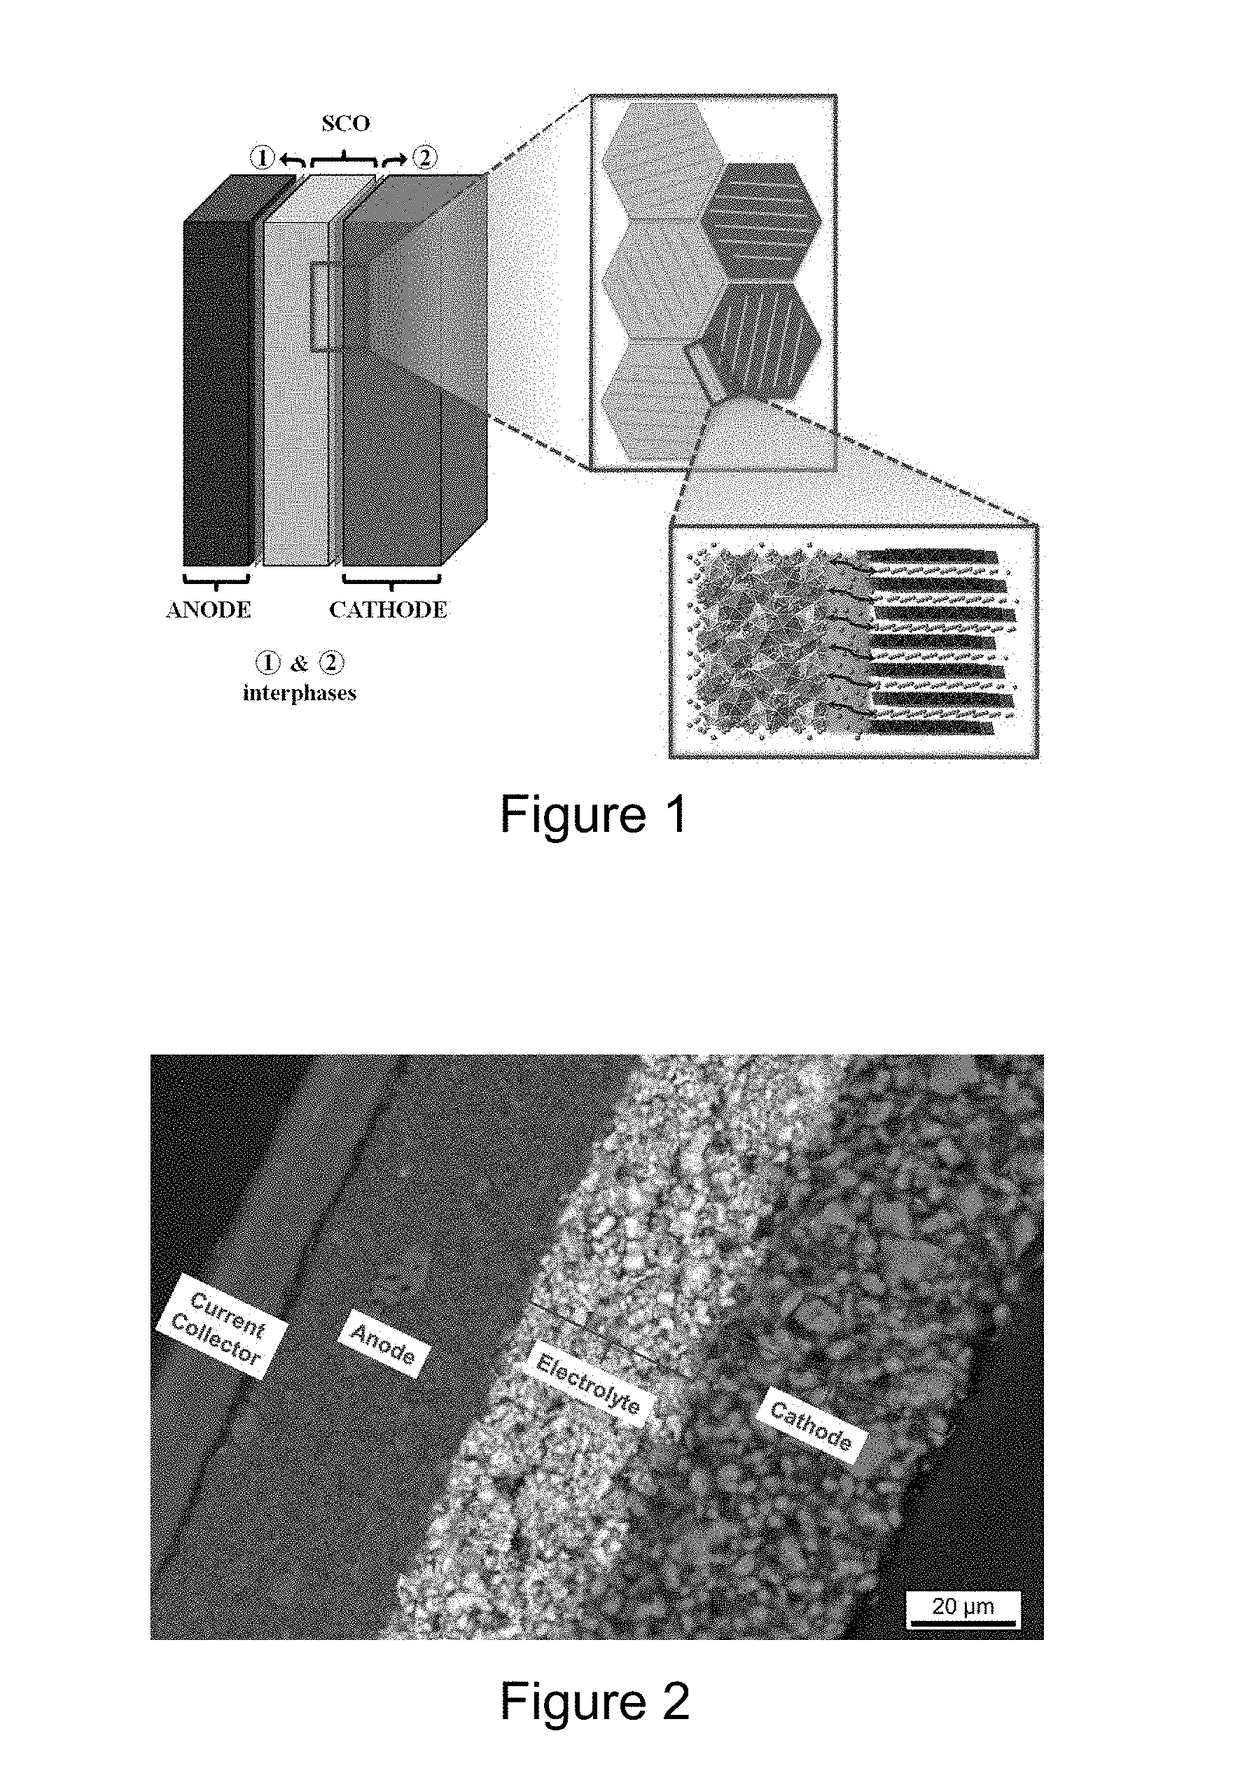 Slurry Formulation for the Formation of Layers for Solid State Batteries